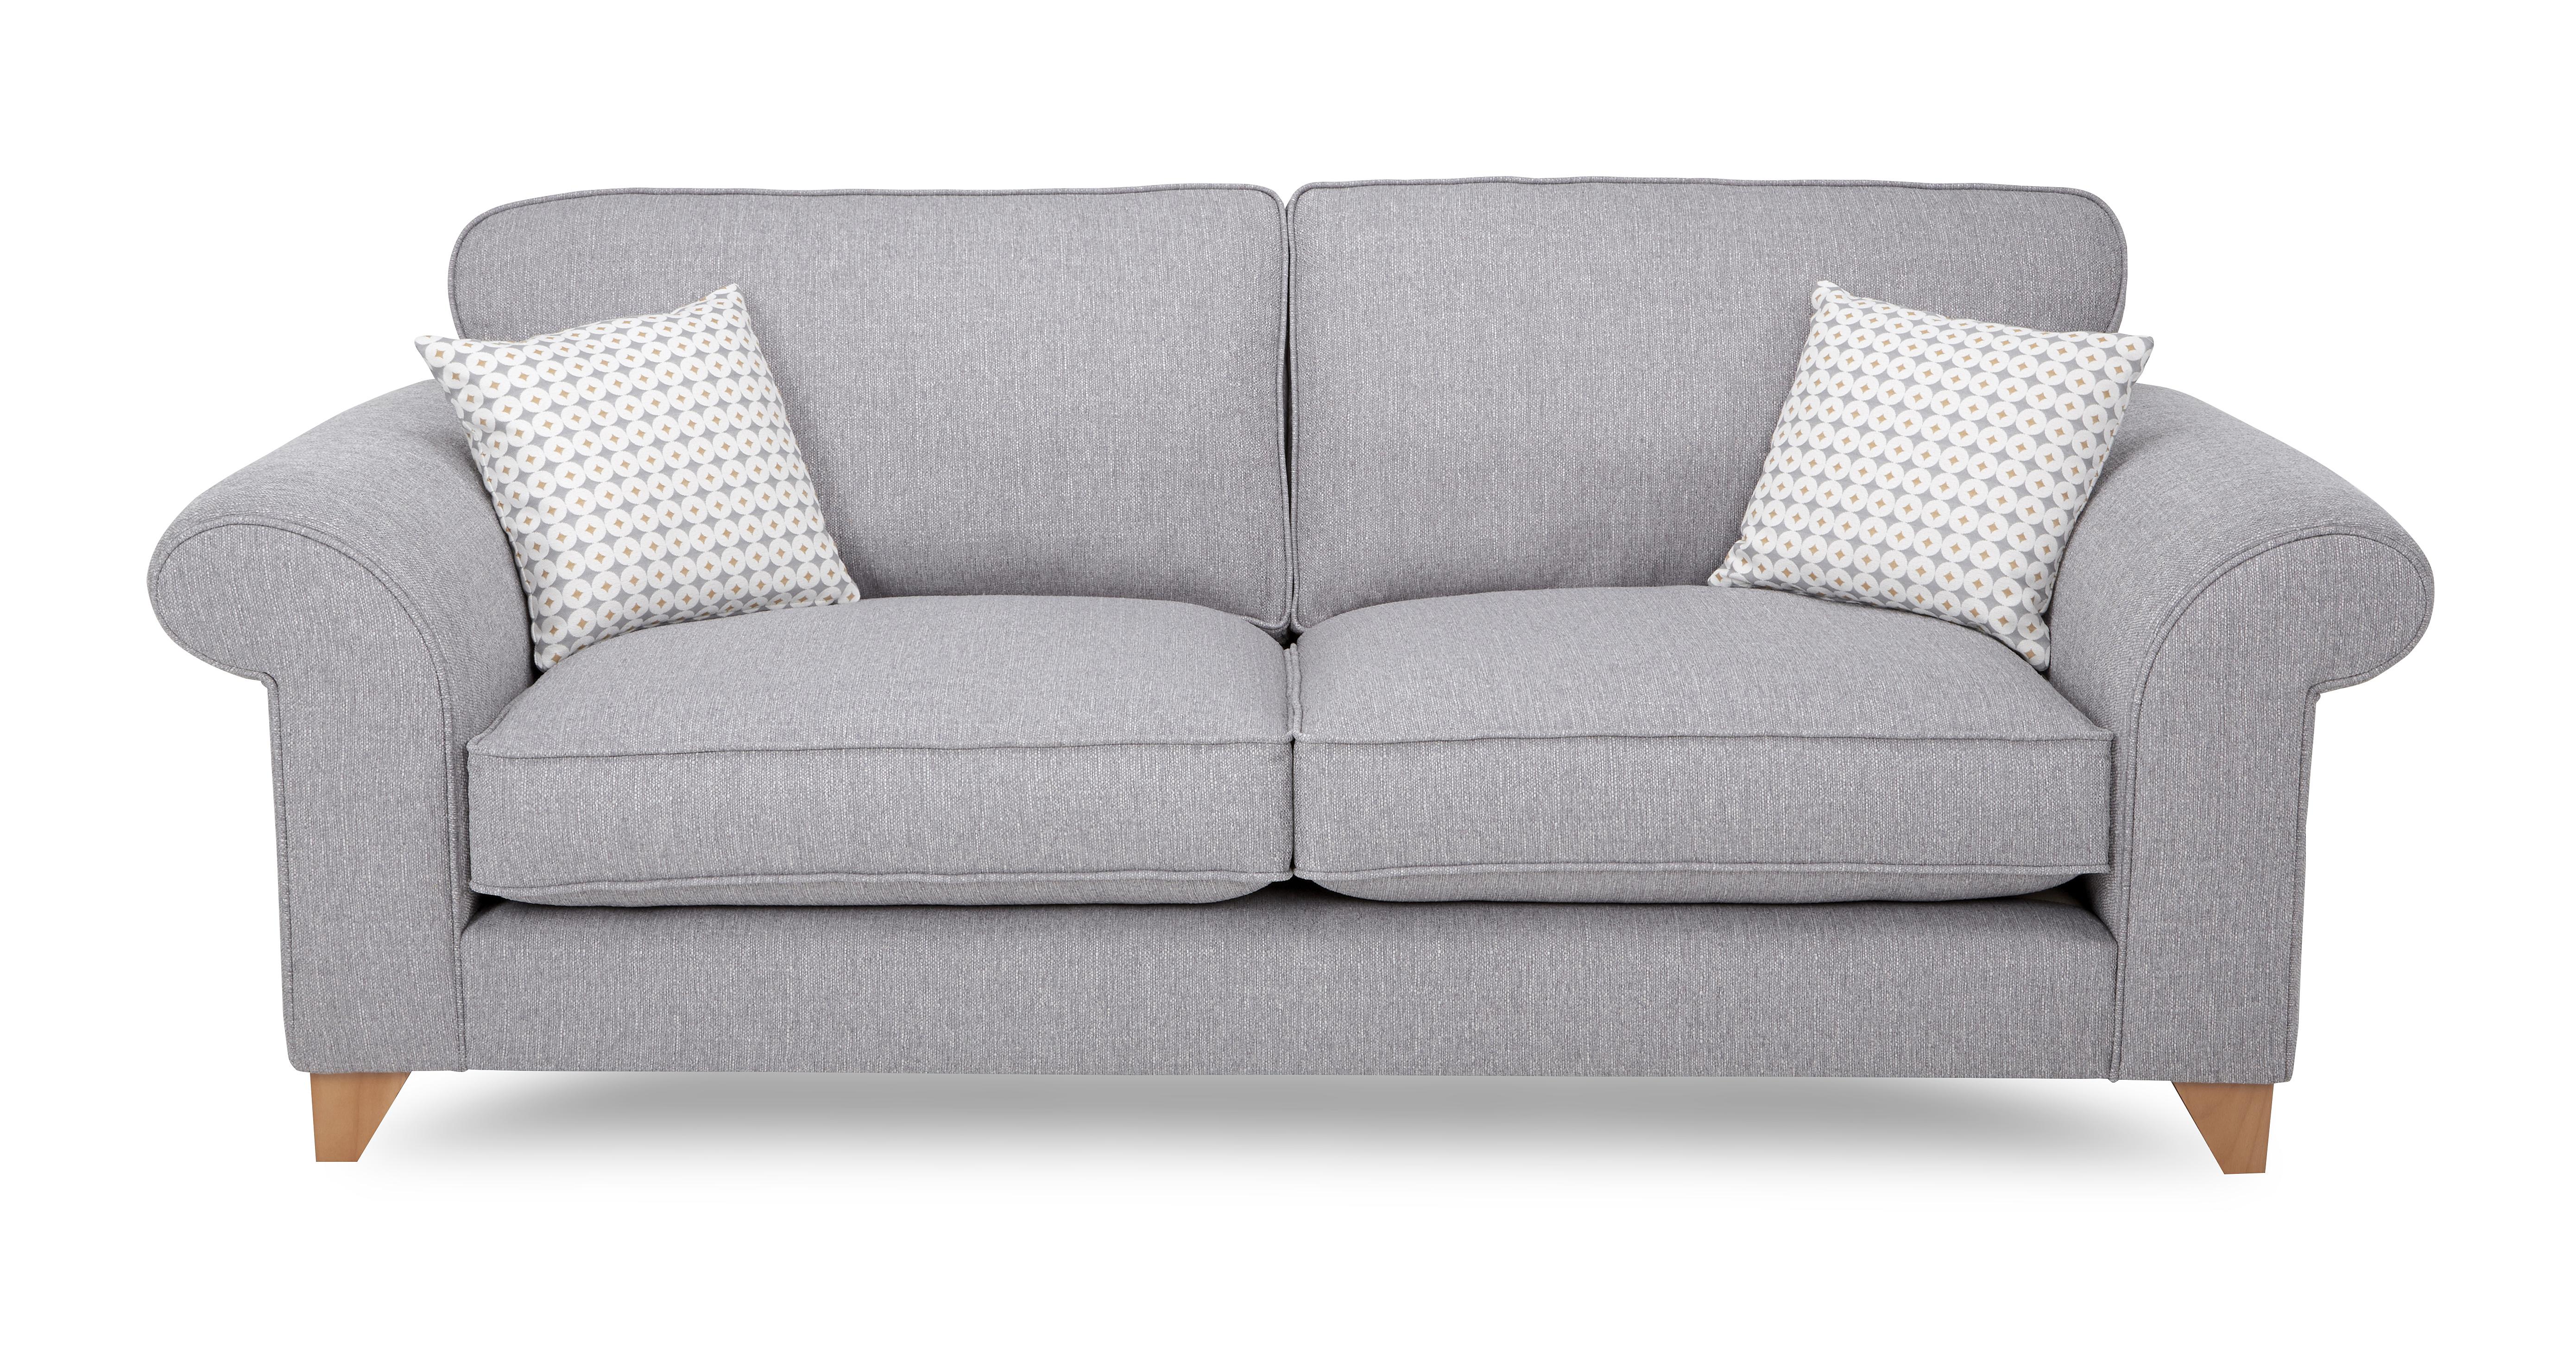 Angelic 3 Seater Sofa DFS